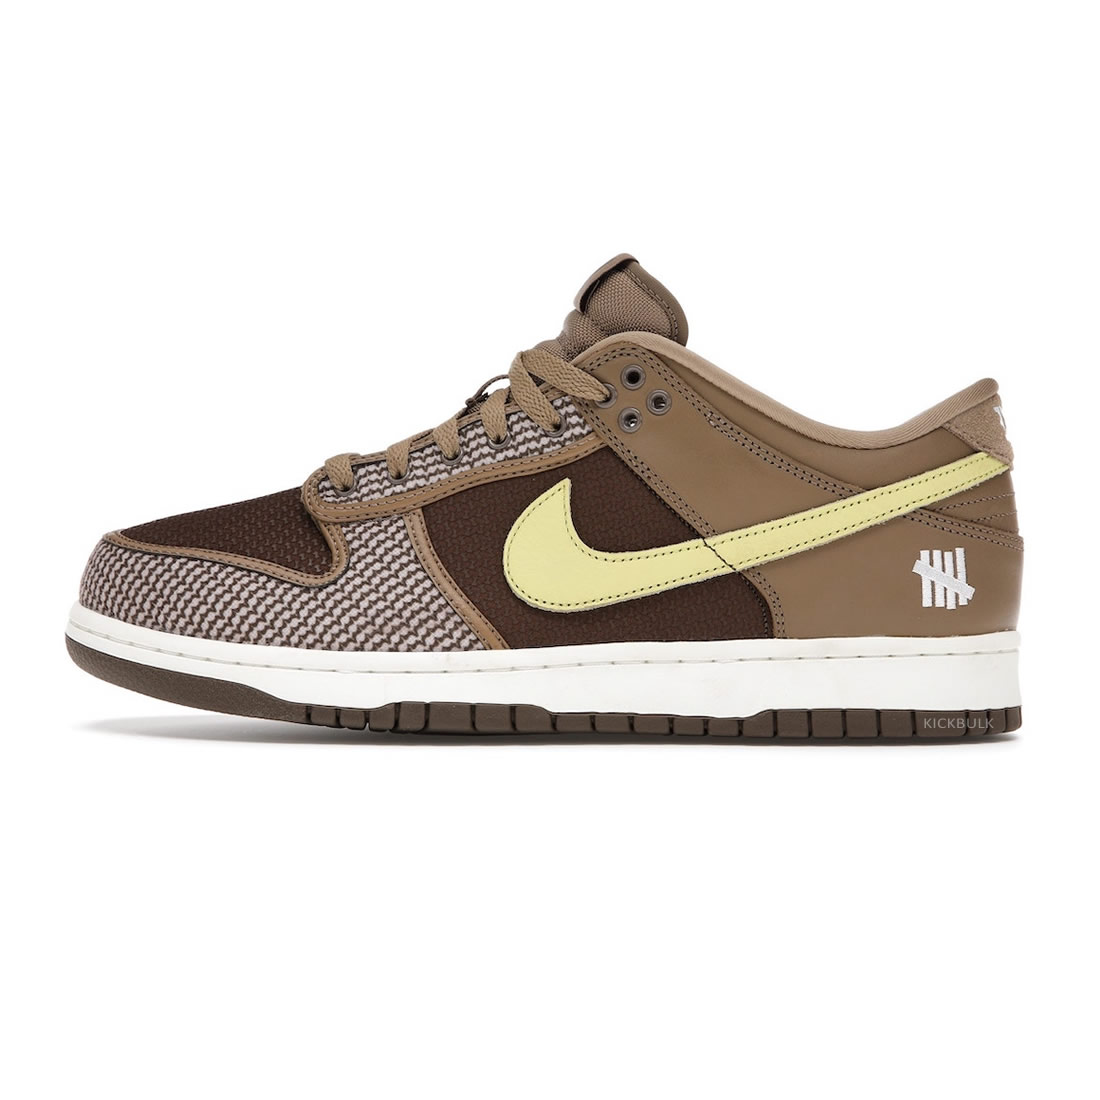 Undefeated Nike Dunk Low Sp Canteen Dh3061 200 1 - kickbulk.co